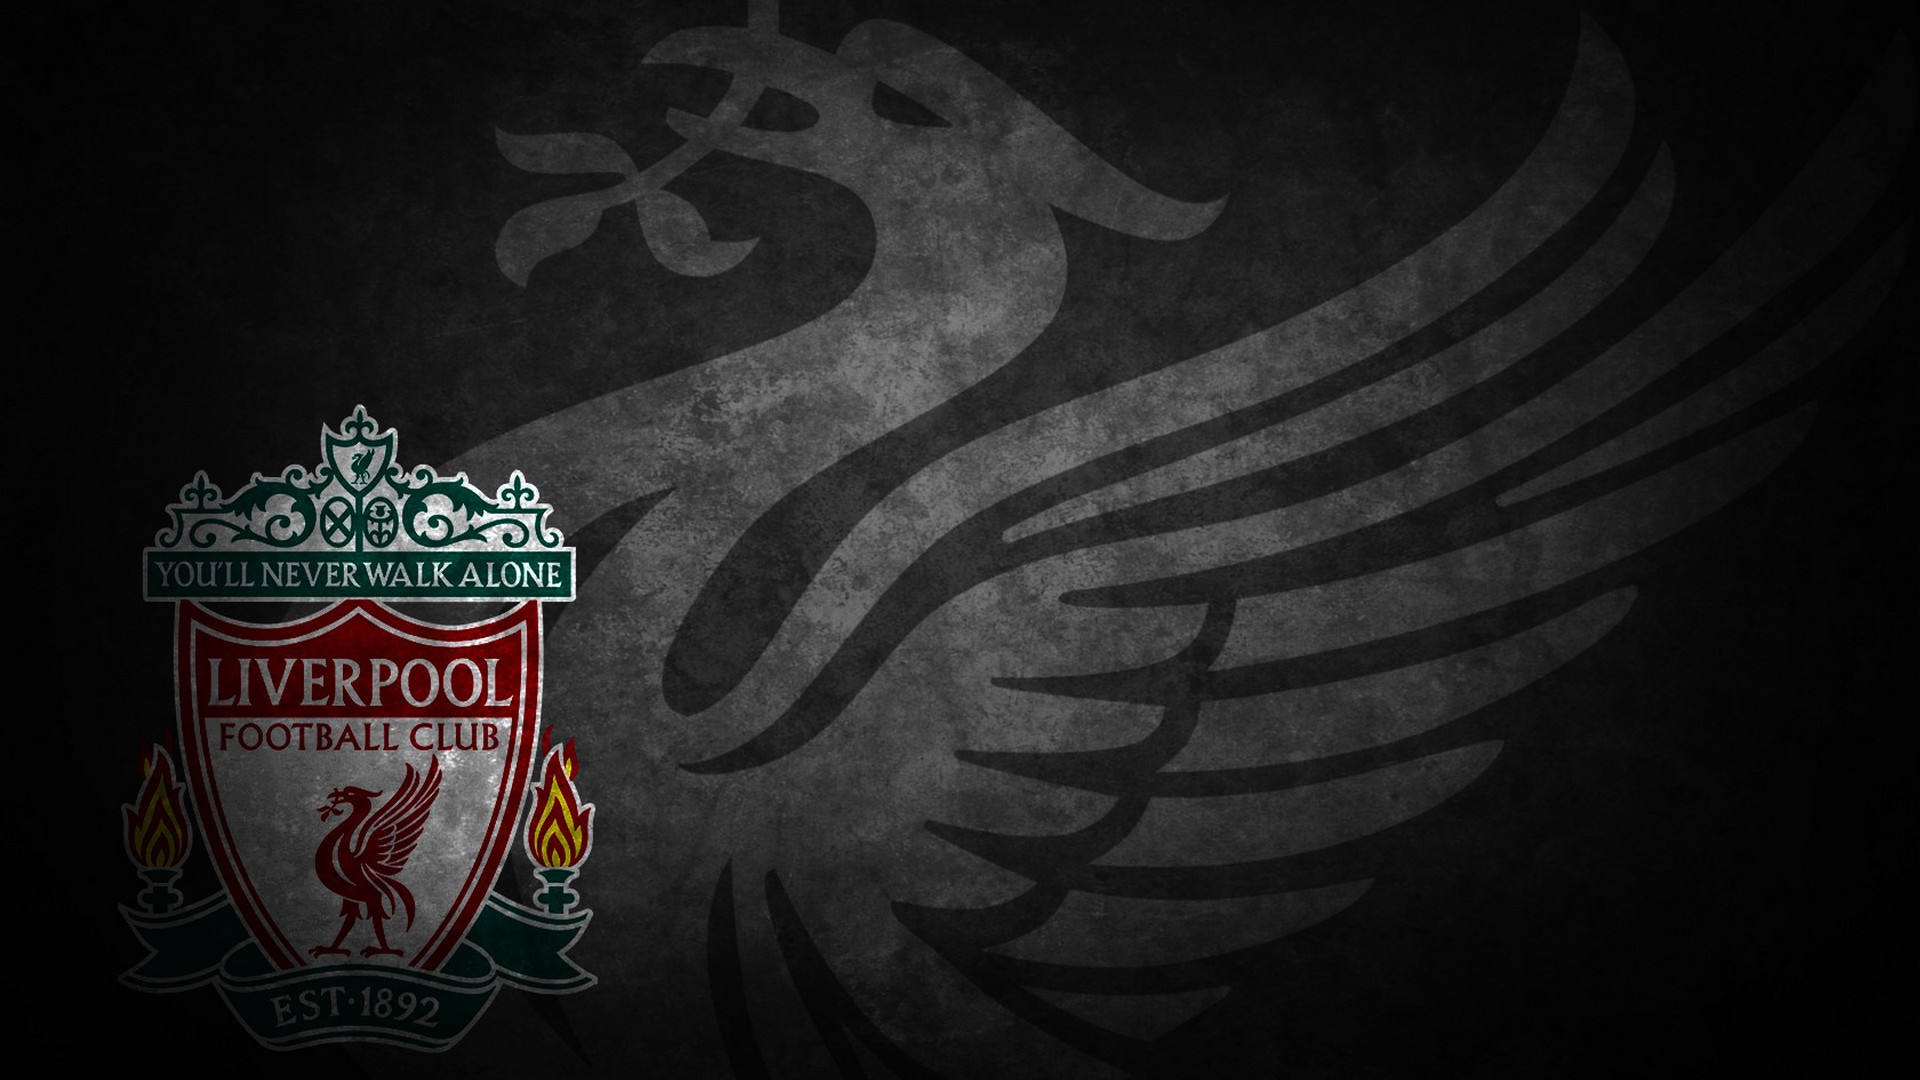 Liverpool For Mac Wallpaper With Resolution 1920X1080 pixel. You can make this wallpaper for your Mac or Windows Desktop Background, iPhone, Android or Tablet and another Smartphone device for free